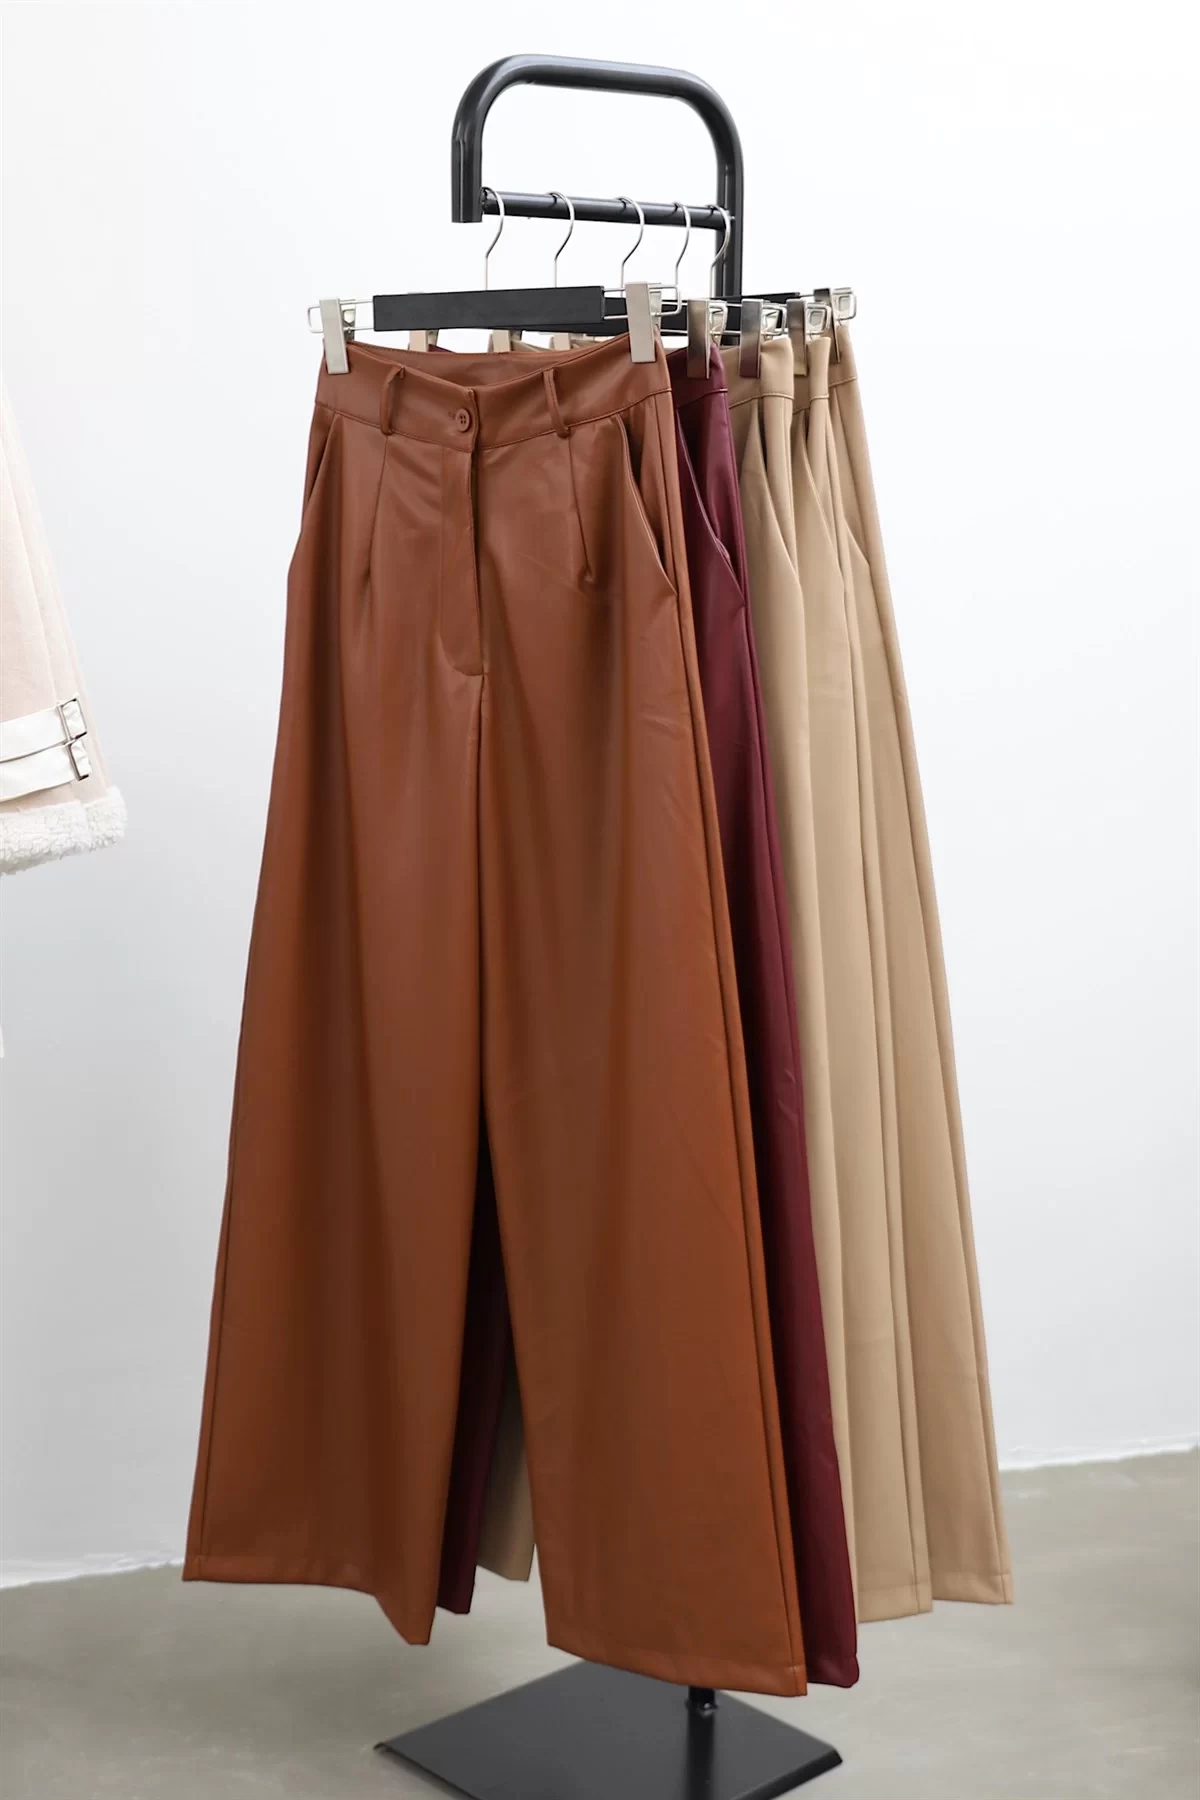 Bs Wide Leg Leather Trousers